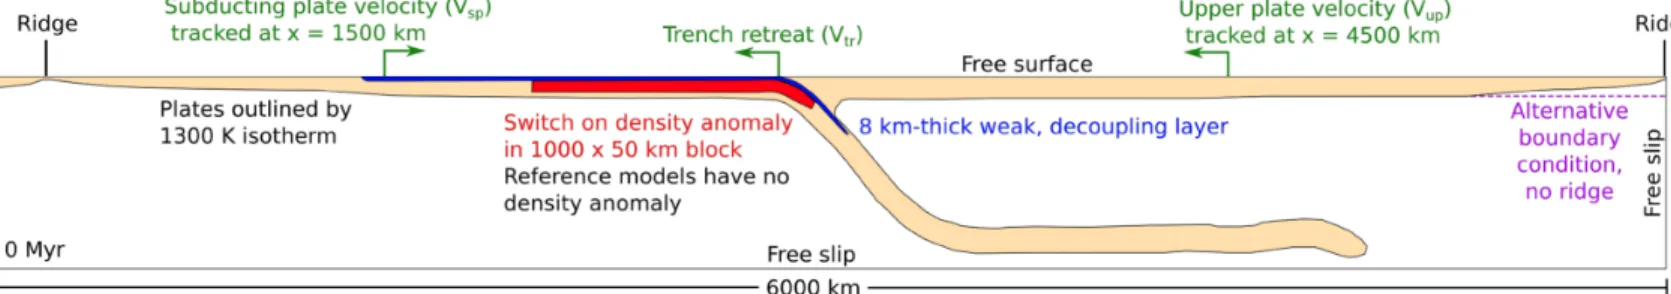 Figure   1:   Model   initial   conditions   where   quasi-steady-state   subduction   is already achieved